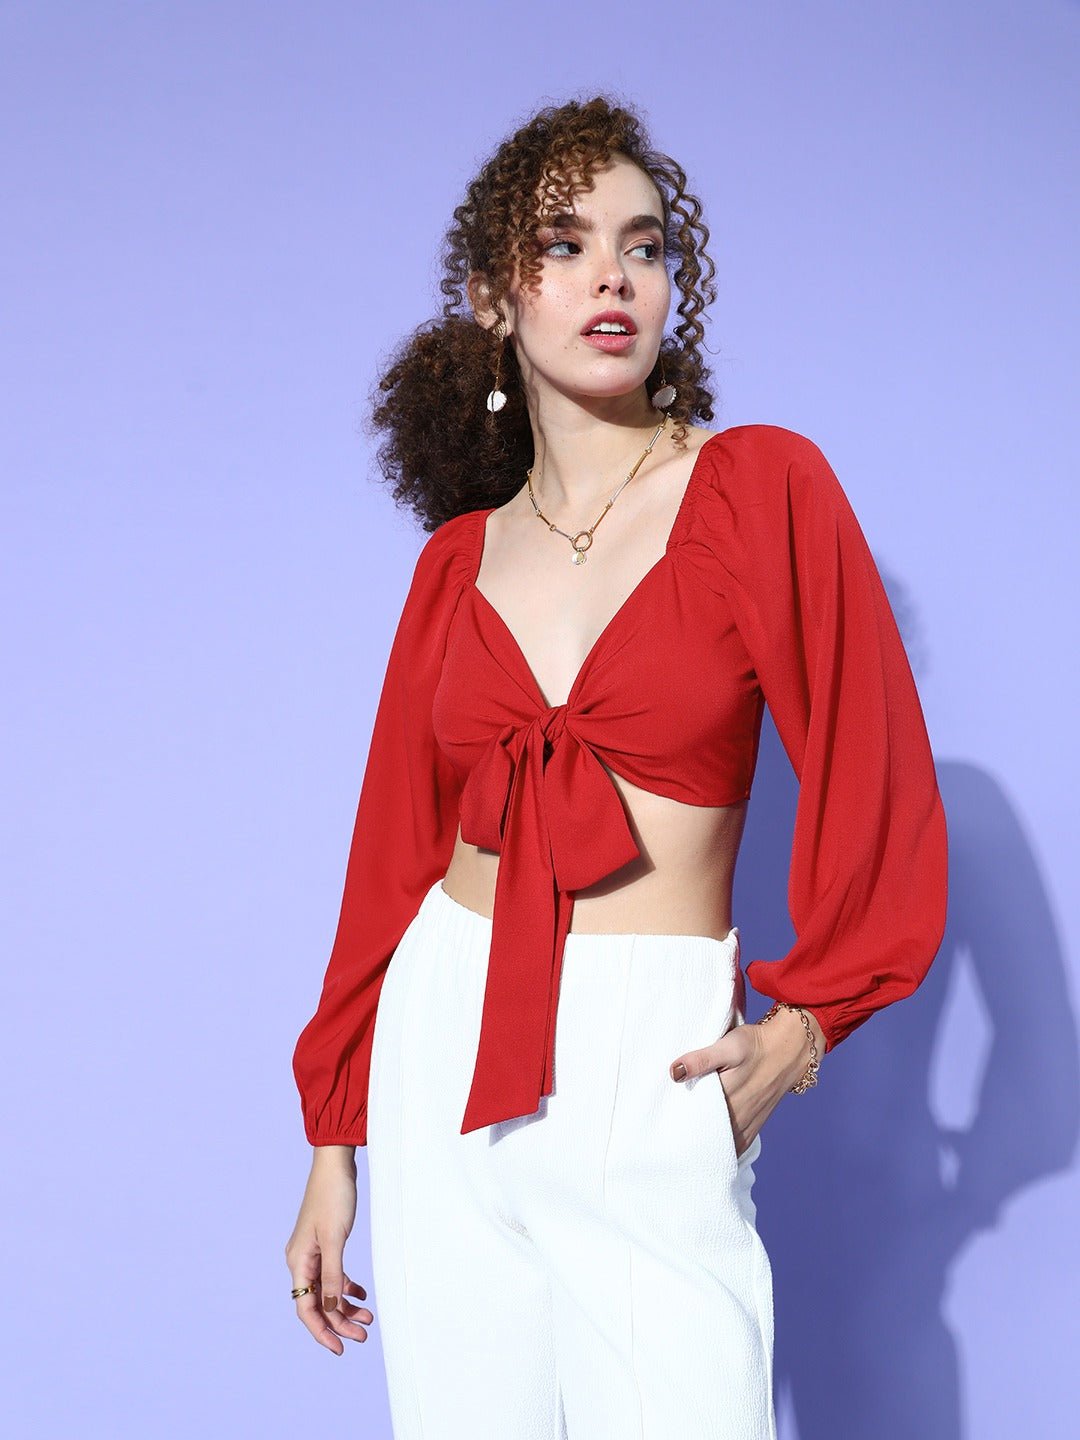 Folk Republic Women Solid Red Sweetheart Neck Front Tie-Up Crepe Cropped Top - #folk republic#